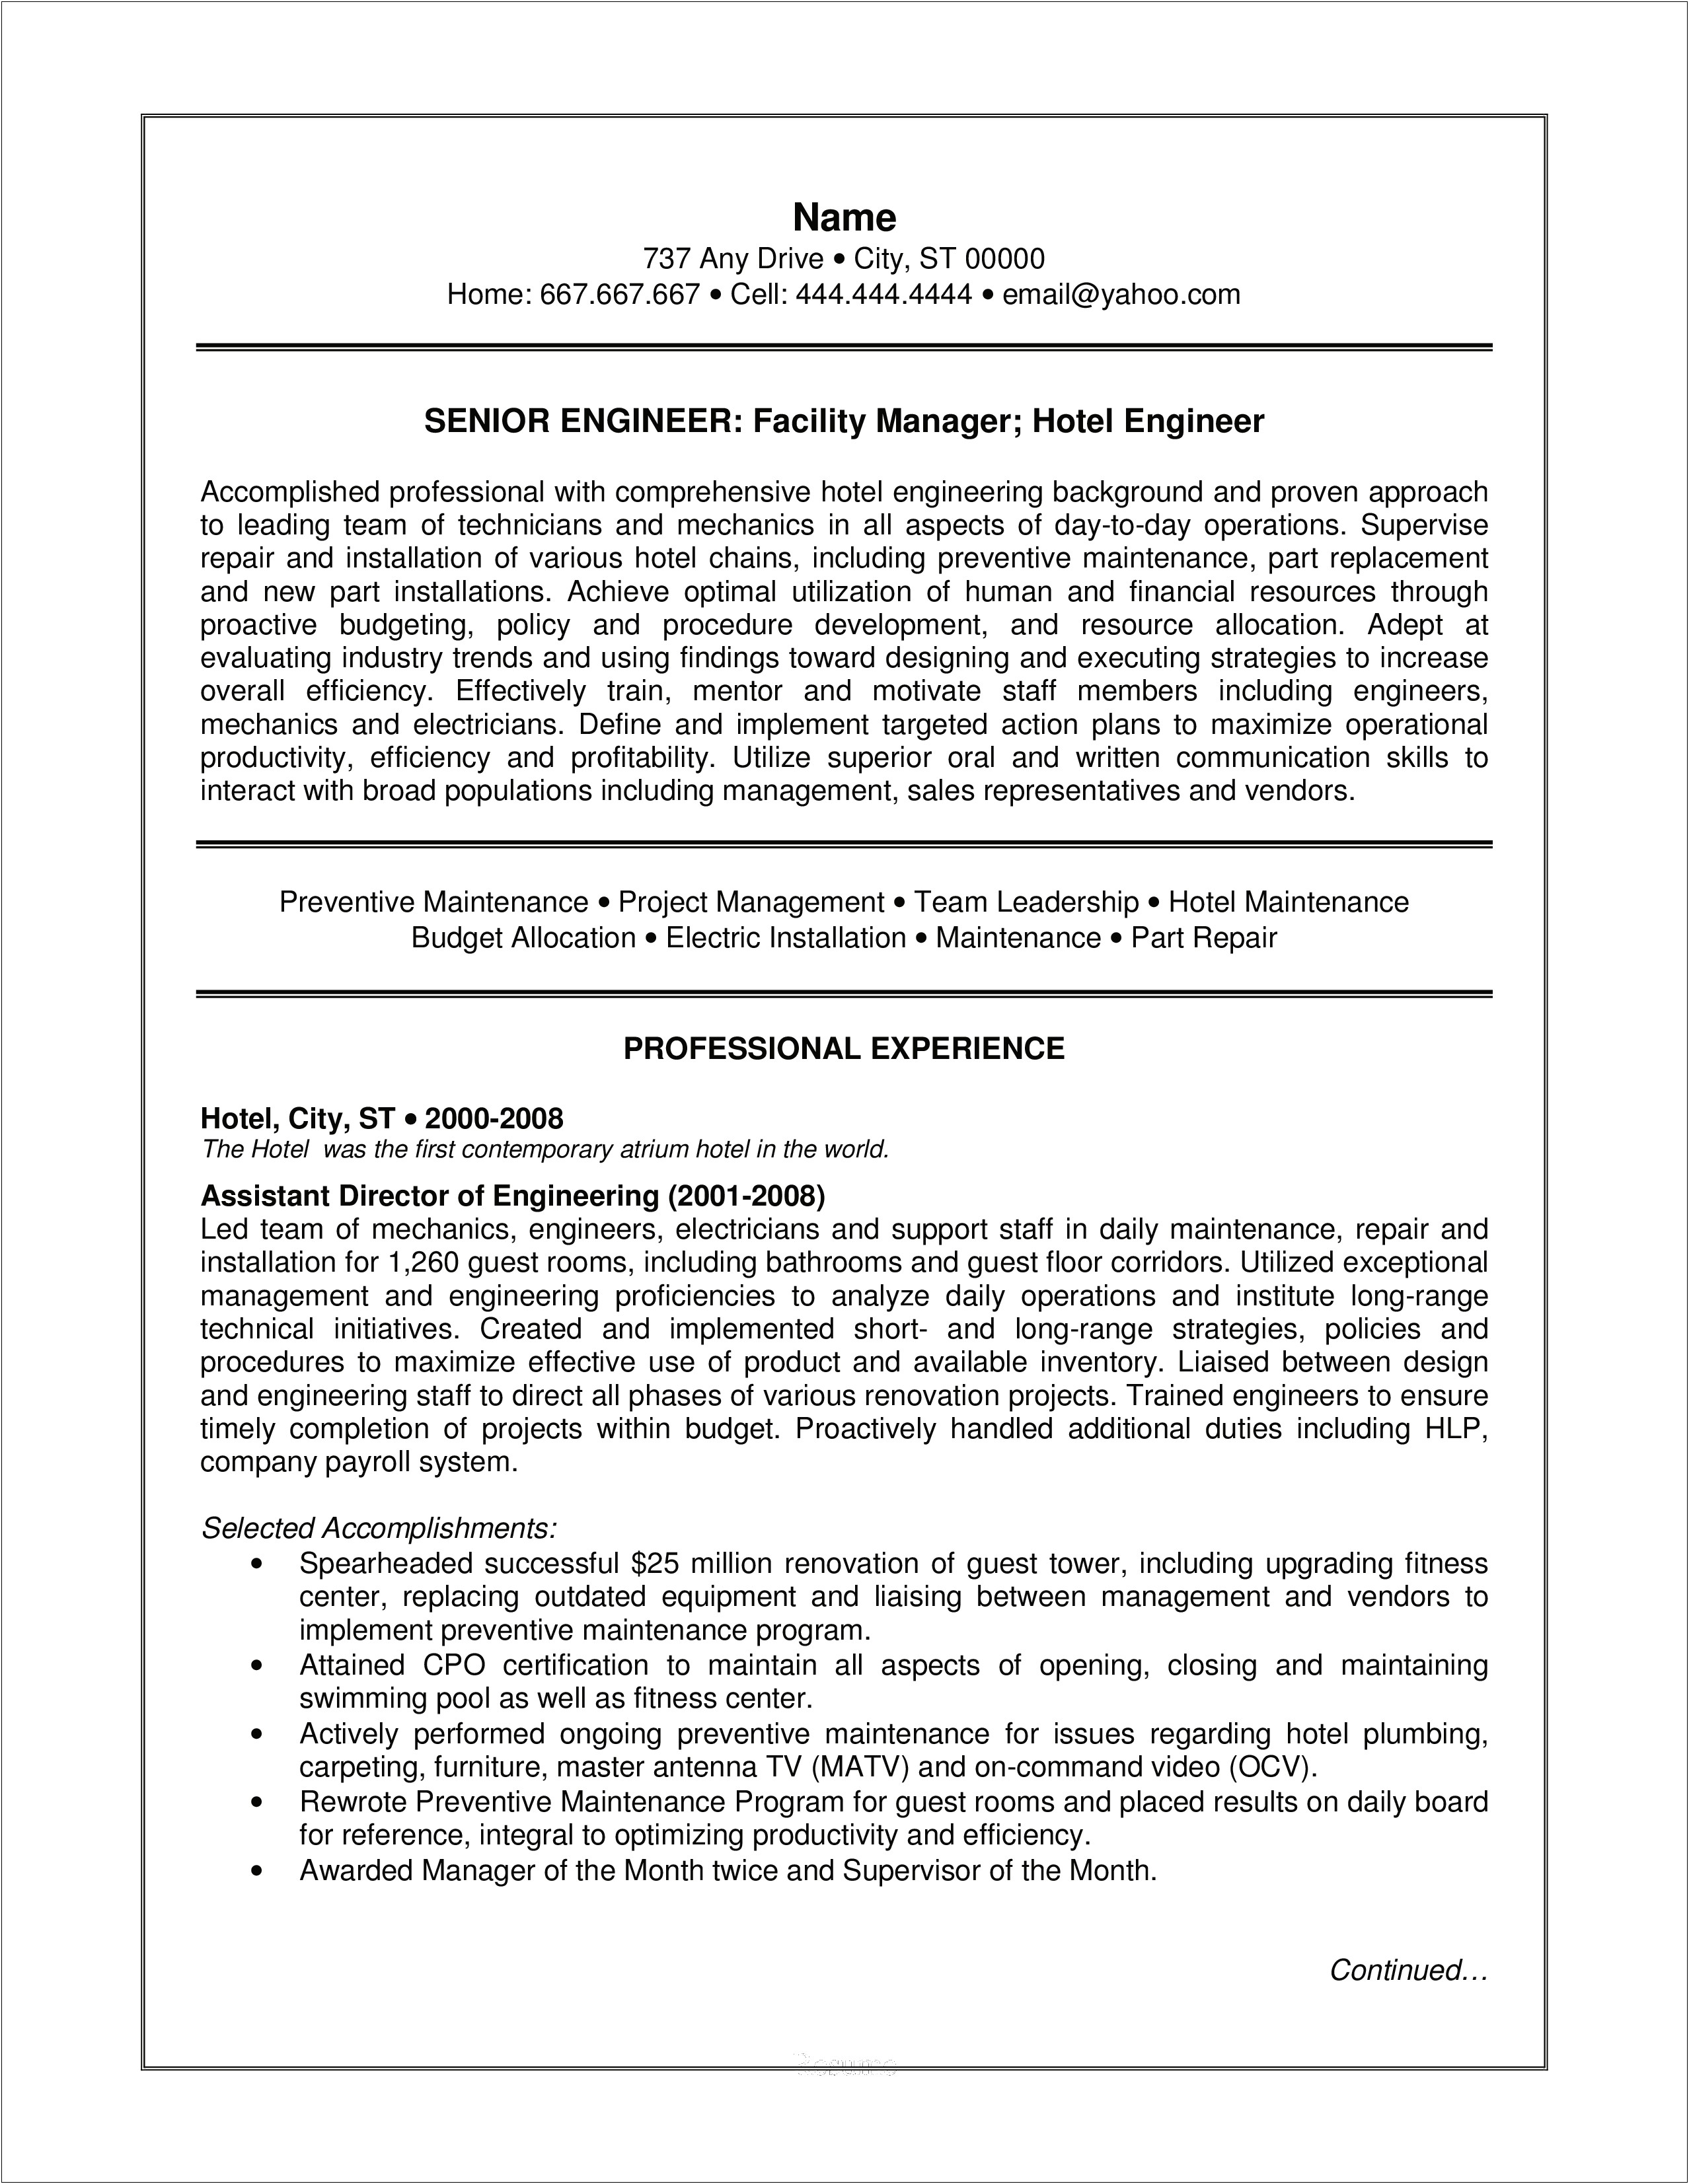 Resume For Senior Project Manager Engineering